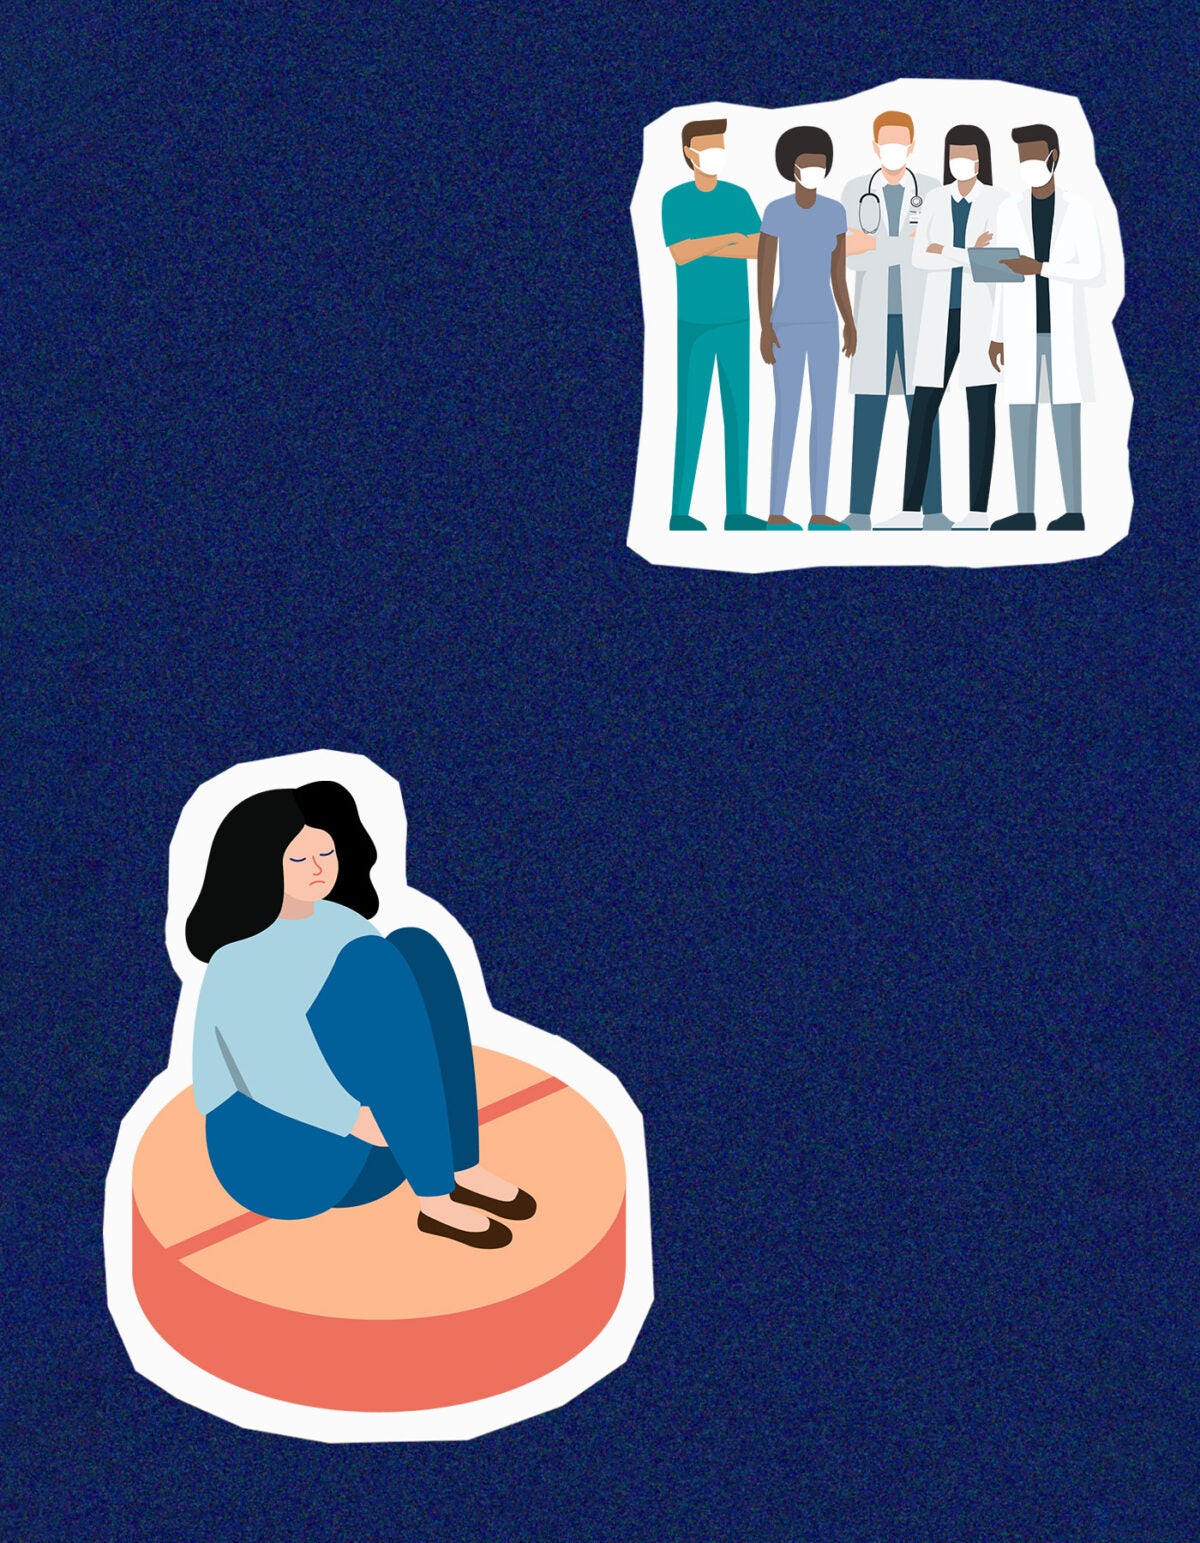 Illustration: A woman, dressed in blue, sits on an oversized pill in the left foreground. In the top right, a group of doctors stand with their arms crossed. The illustrations are on a dark blue static background.